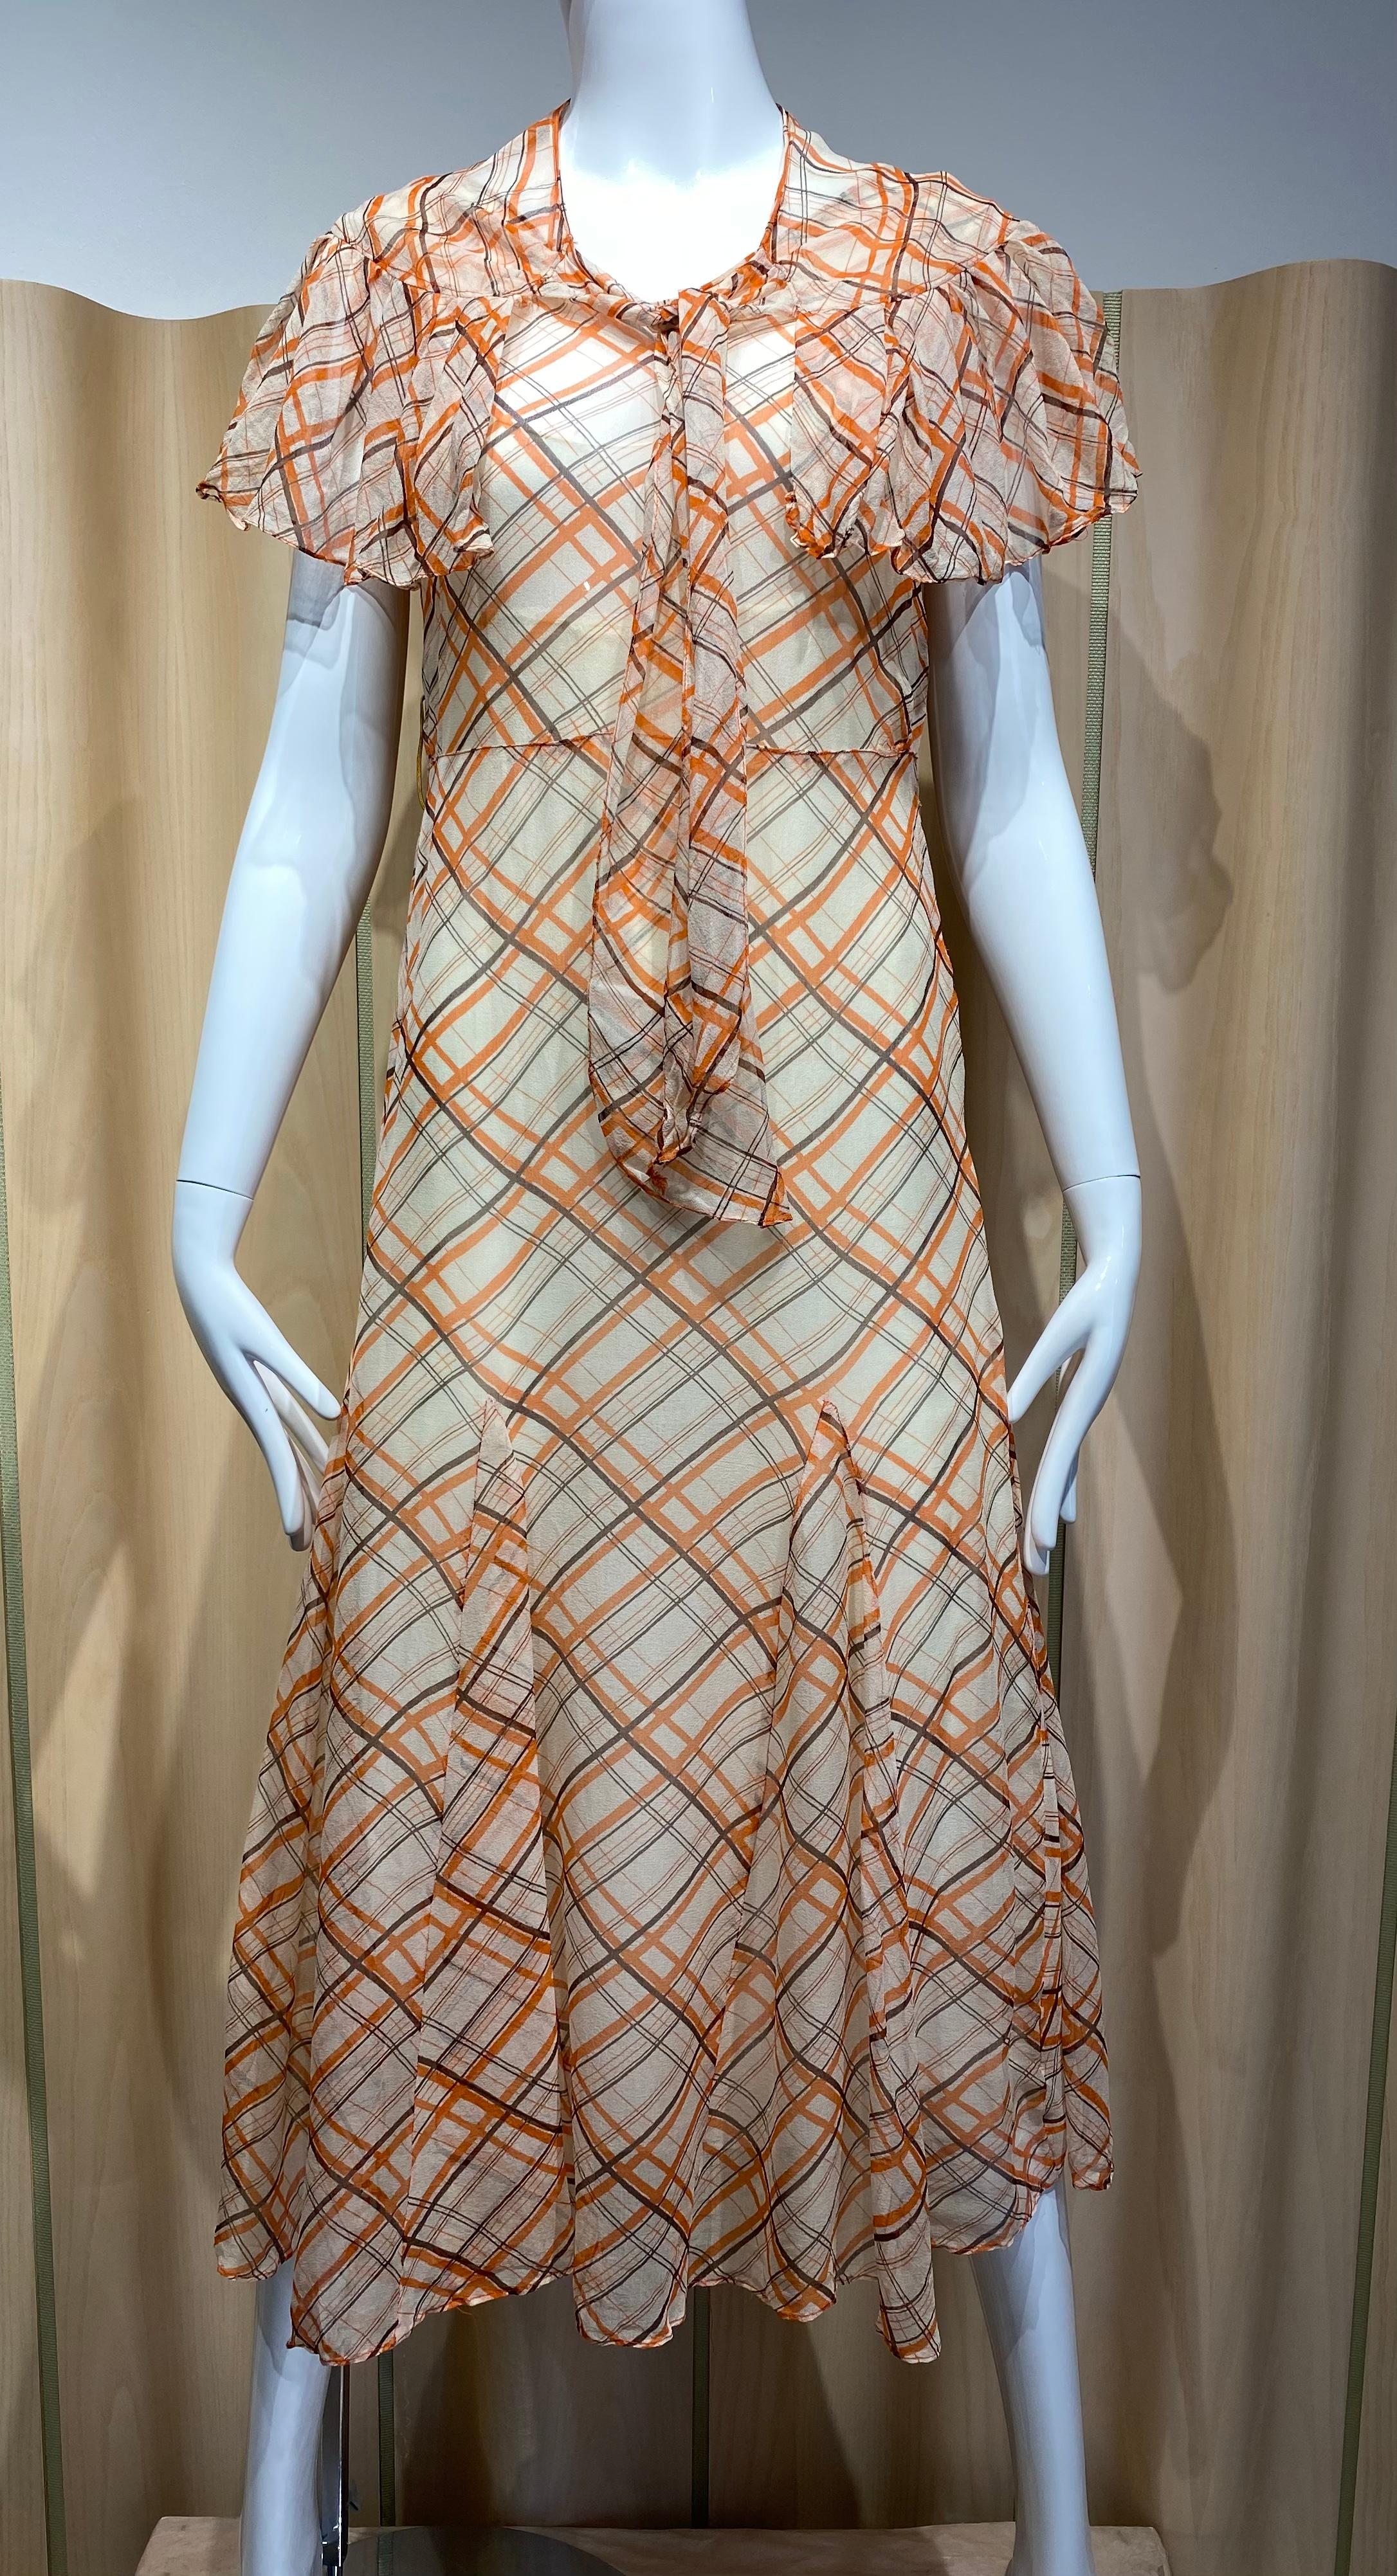 1930s Orange and Black plaid print Silk chiffon sleeveless dress and capelet. ( 2pcs)
Fit Size US 2


**Dress has some fabric distressed. AS IS 